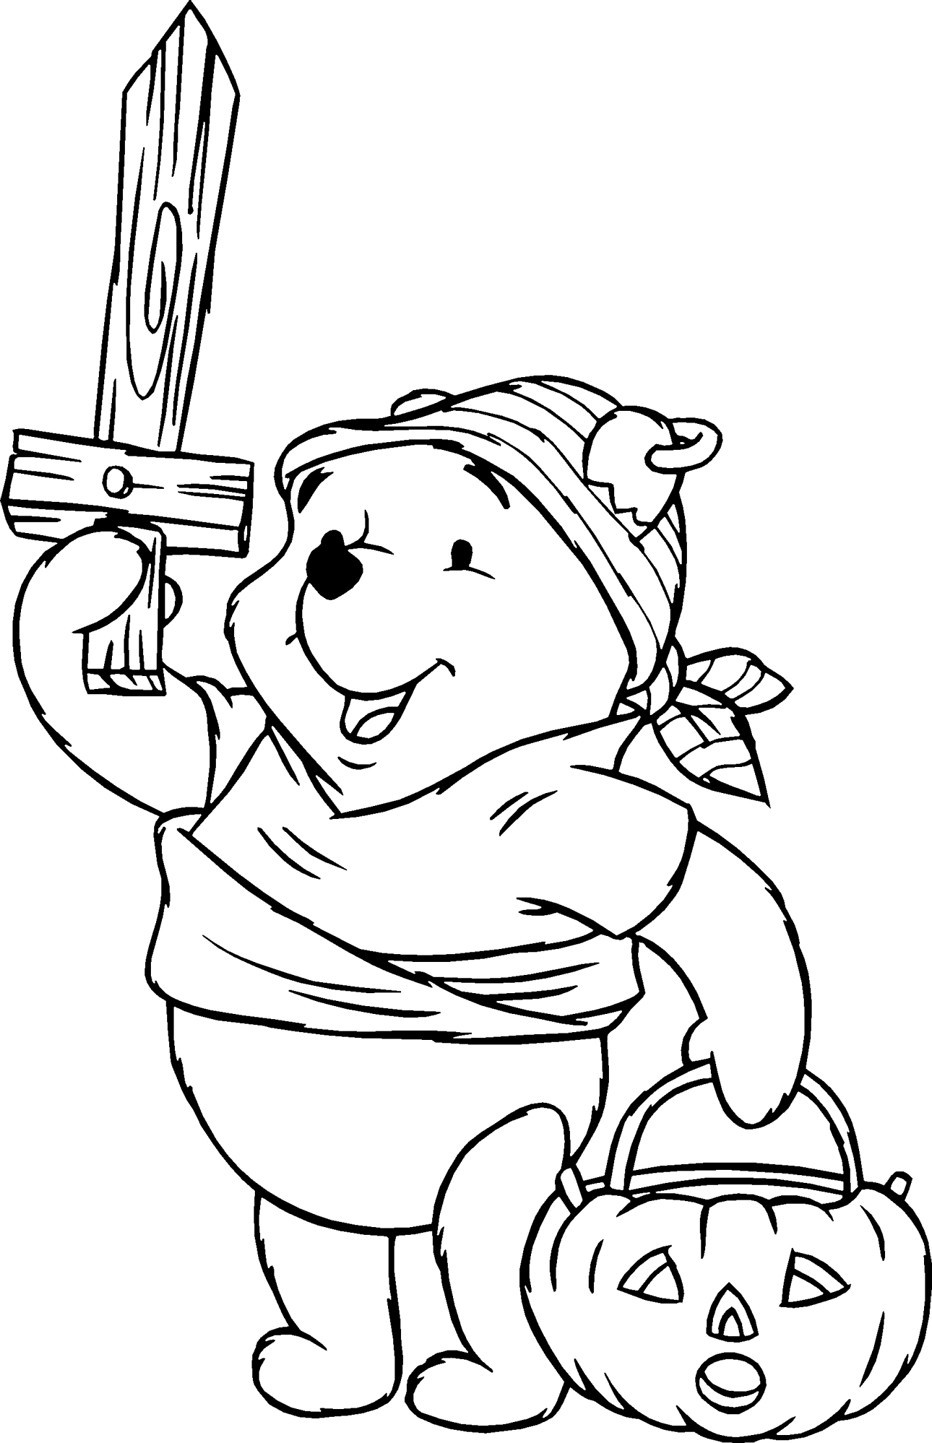 Free Disney Coloring Pages For Kids
 24 Free Printable Halloween Coloring Pages for Kids